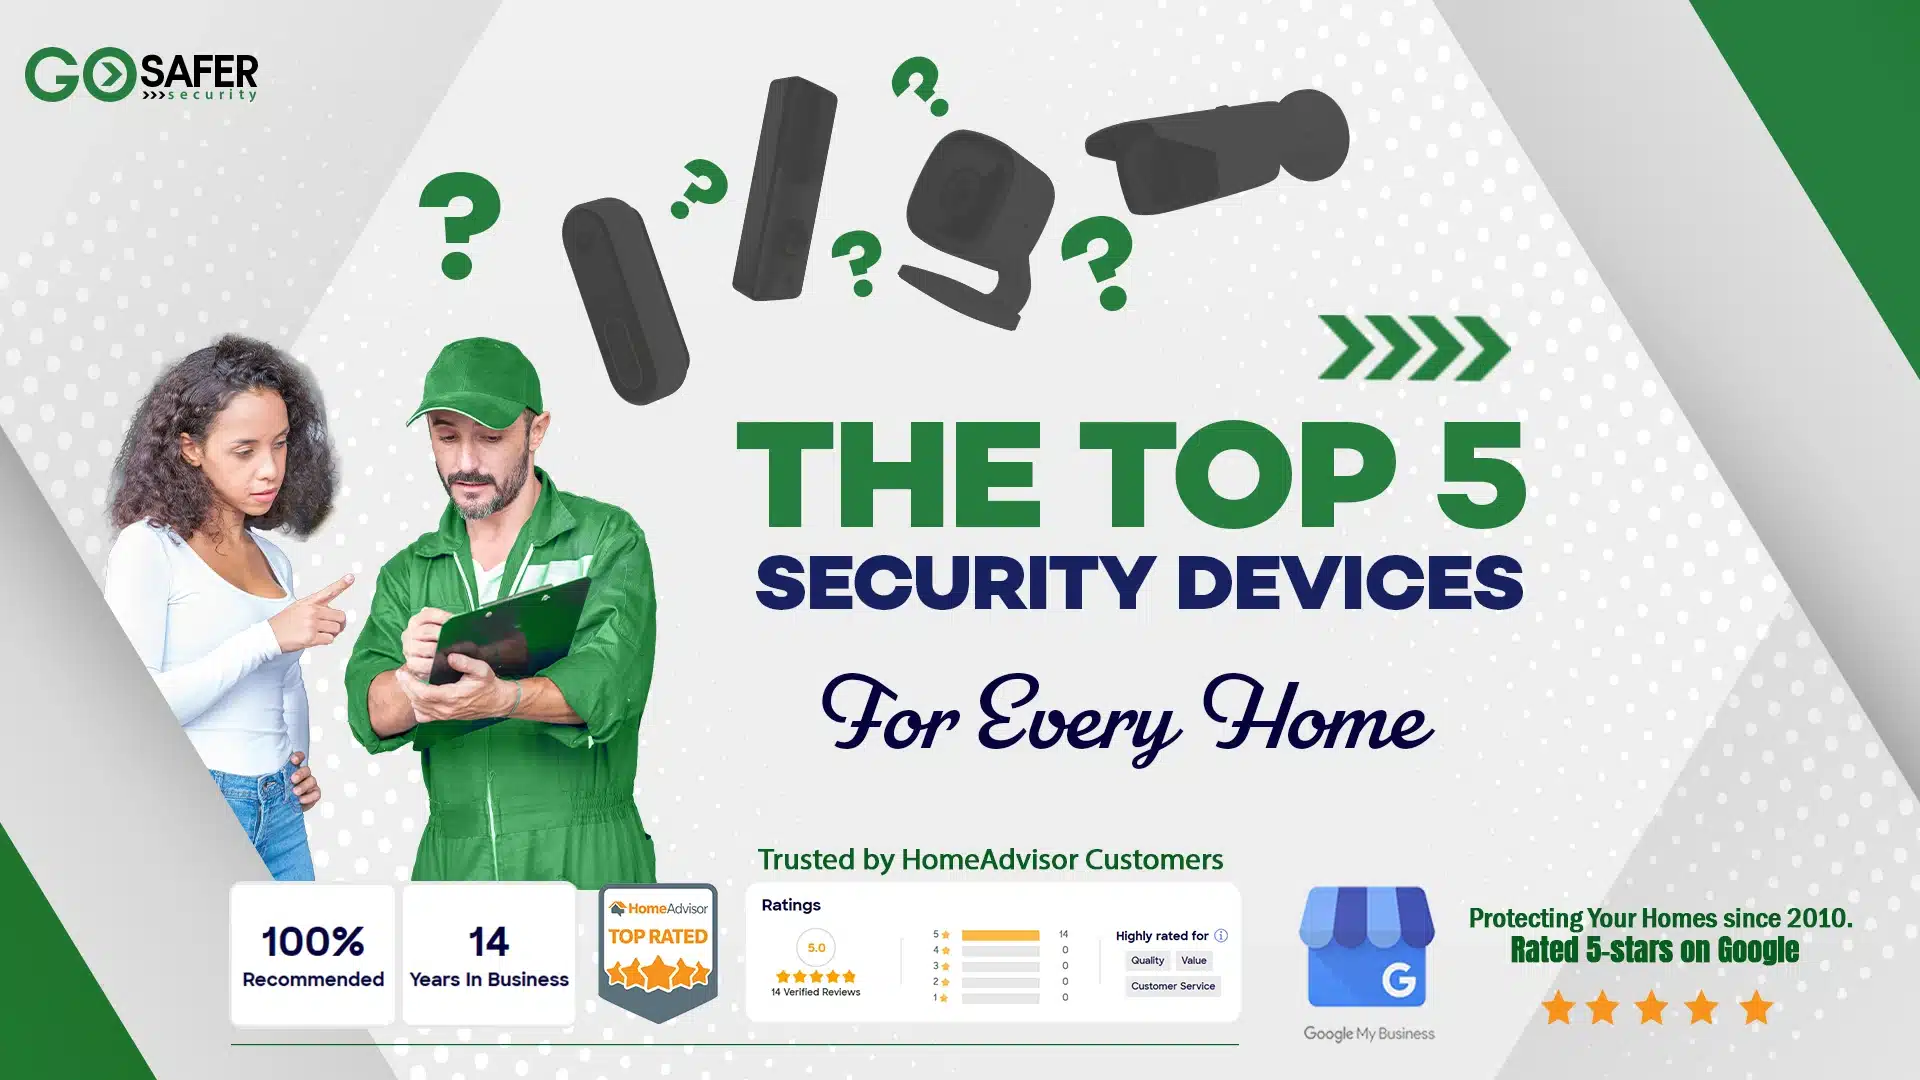 The The Top 5 Security Devices for Every Home